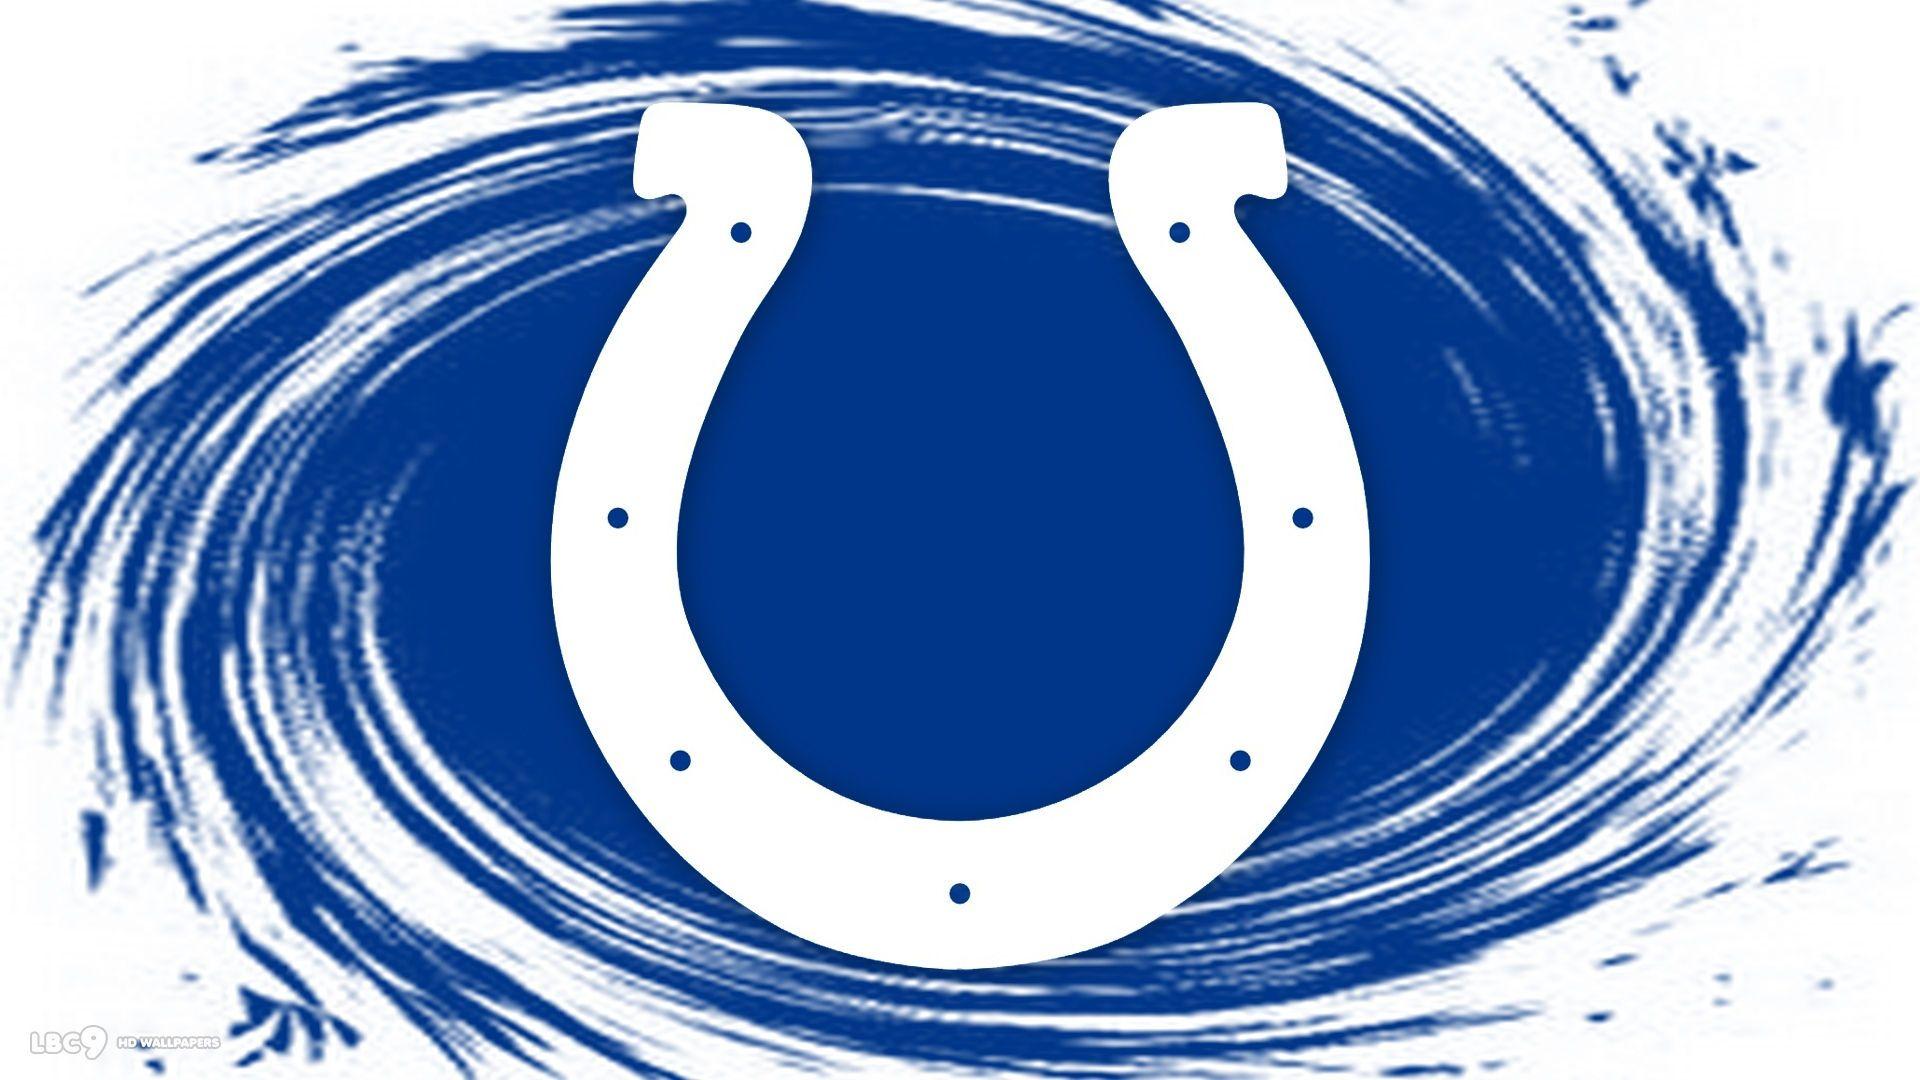 Indianapolis Colts Wallpaper 4 4. Nfl Teams HD Background